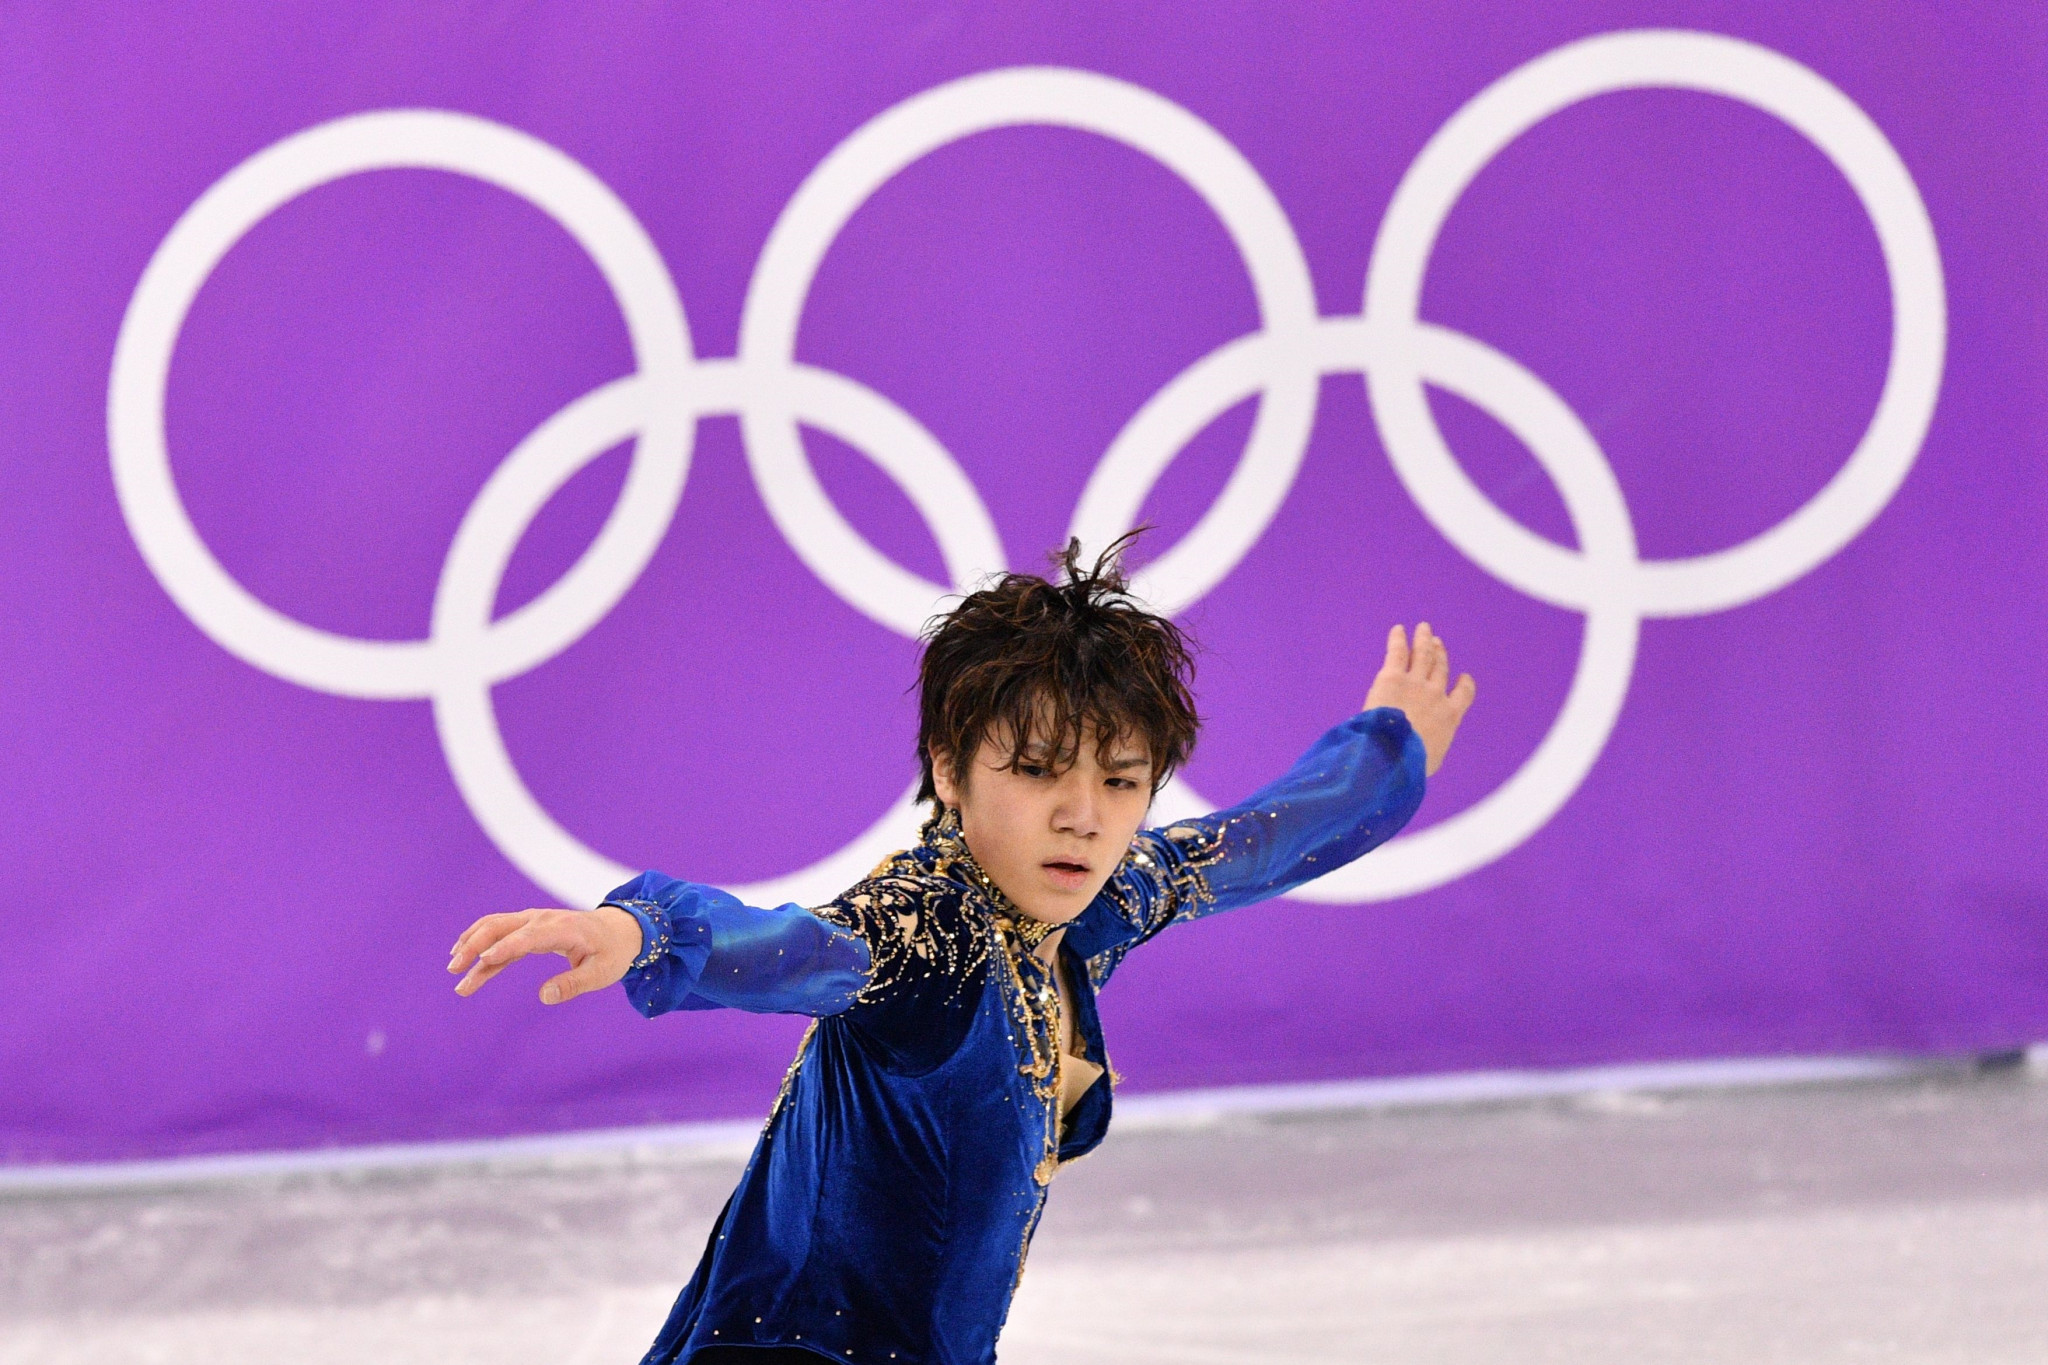 Japan's Shoma Uno had to settle for the silver medal ©Getty Images